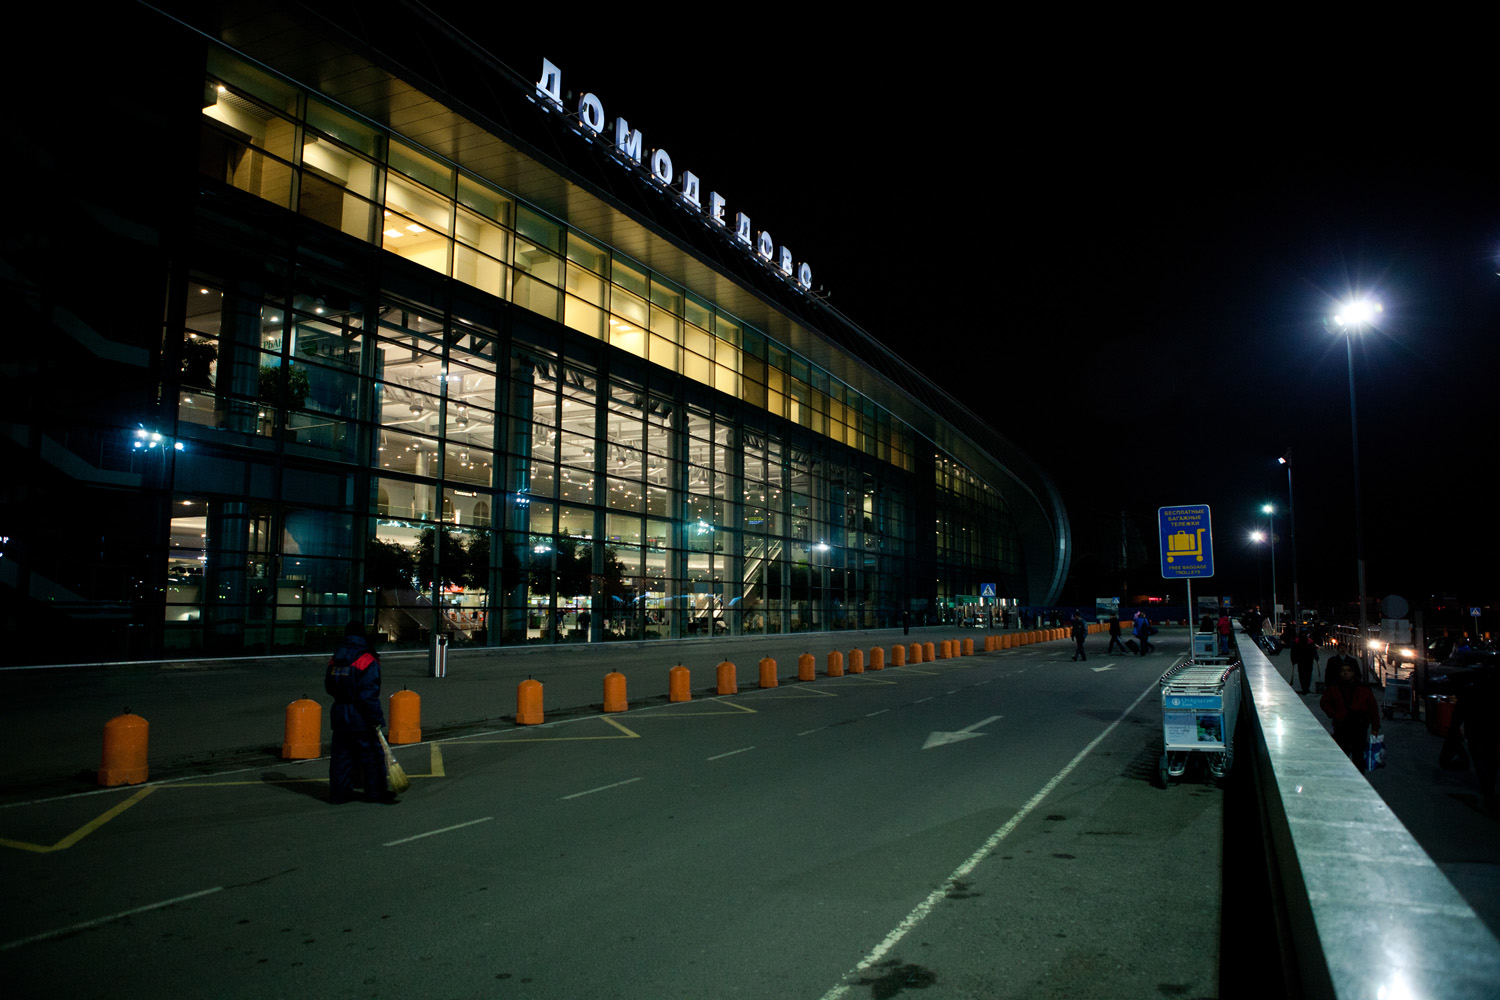 moscow-domodedovo-airport_8225544276_o.jpg